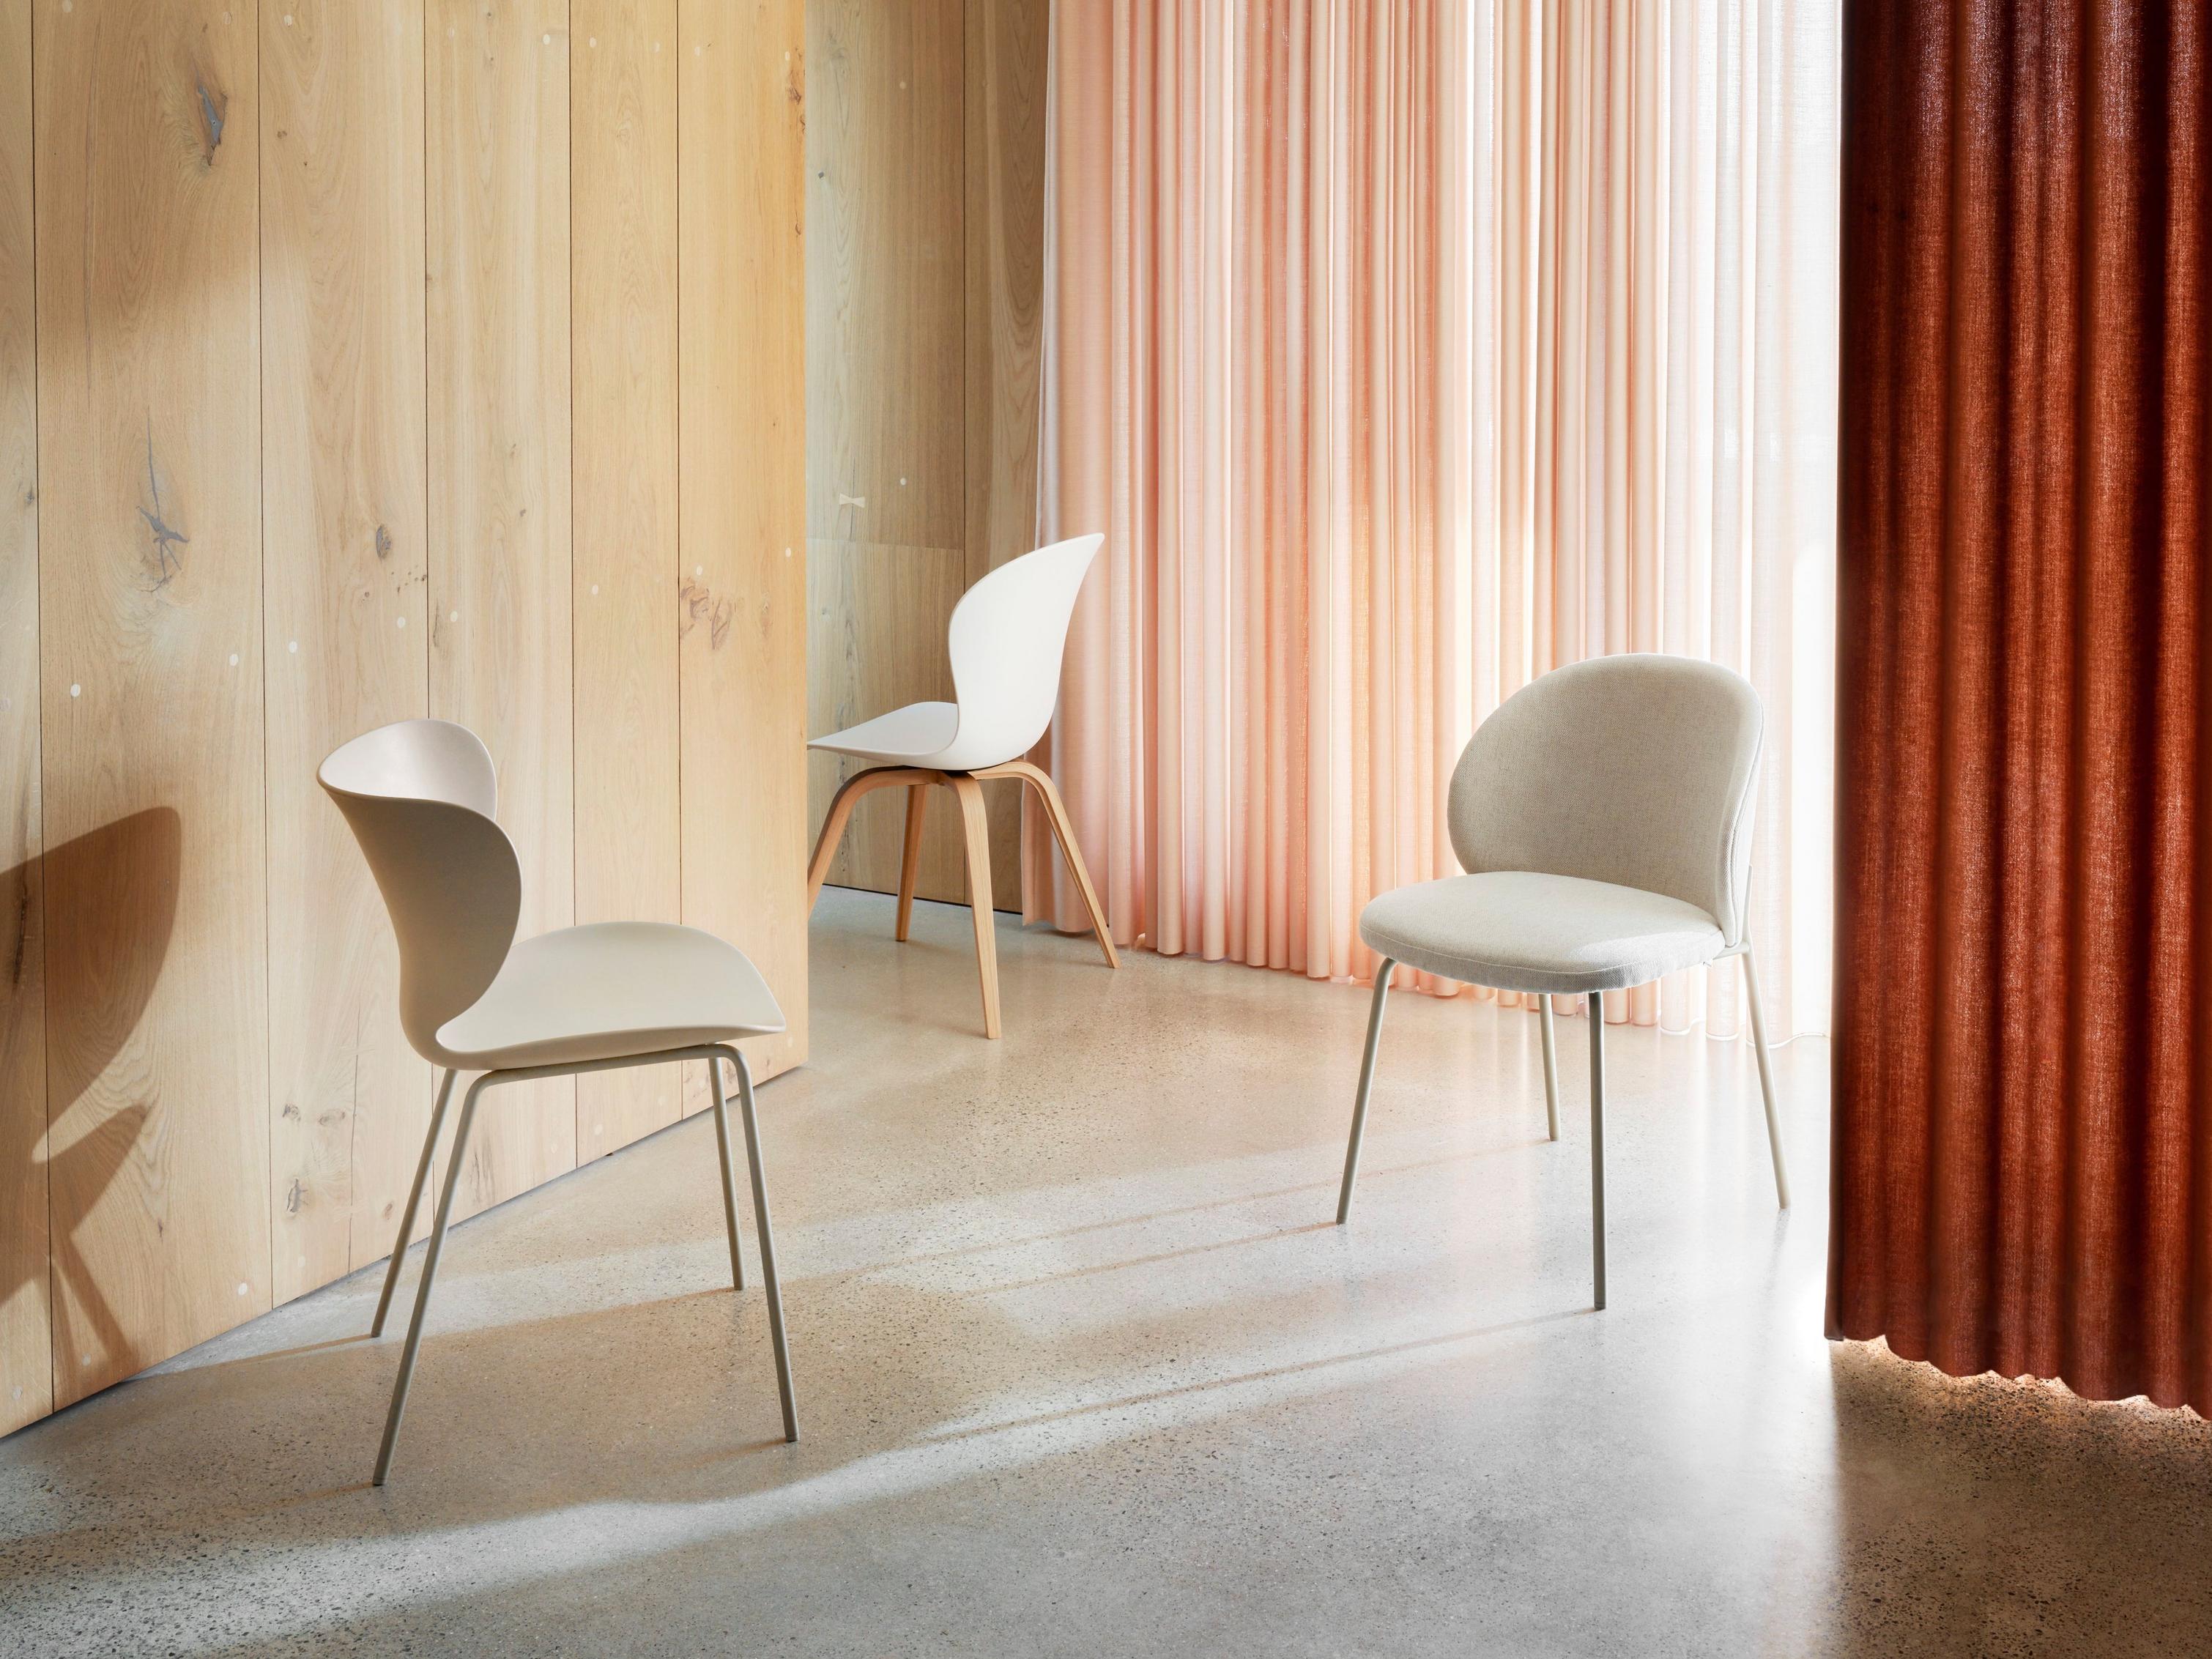 Modern chairs in a room with wooden wall and draped coral curtains.